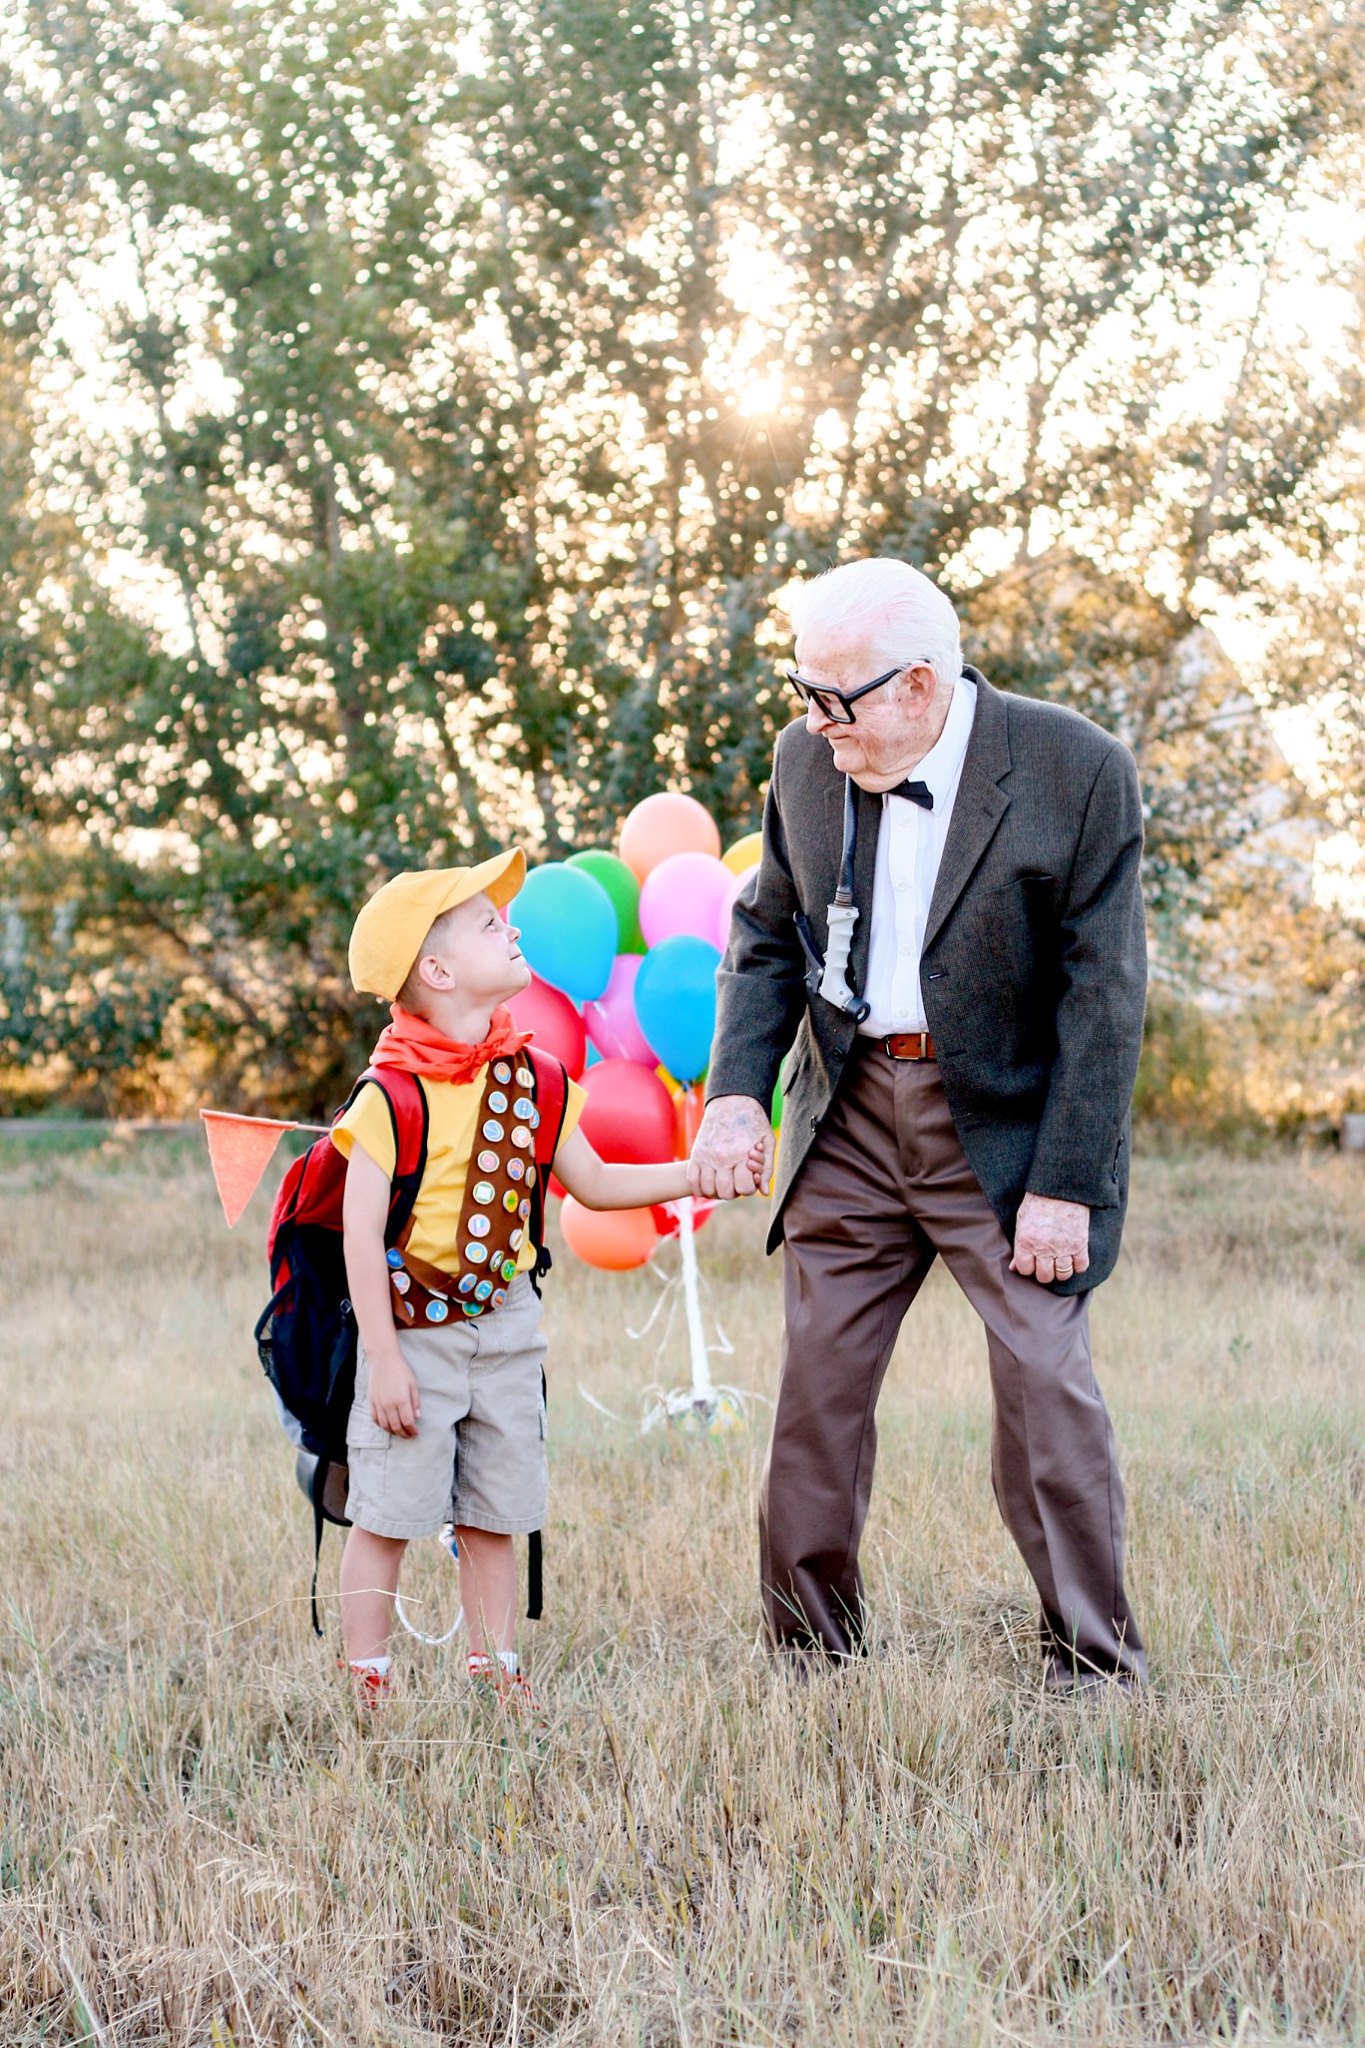 PHOTO: 5-year-old Elijah Perman poses next to his great-grandpa Richard in an 'Up'-themed photoshoot. 